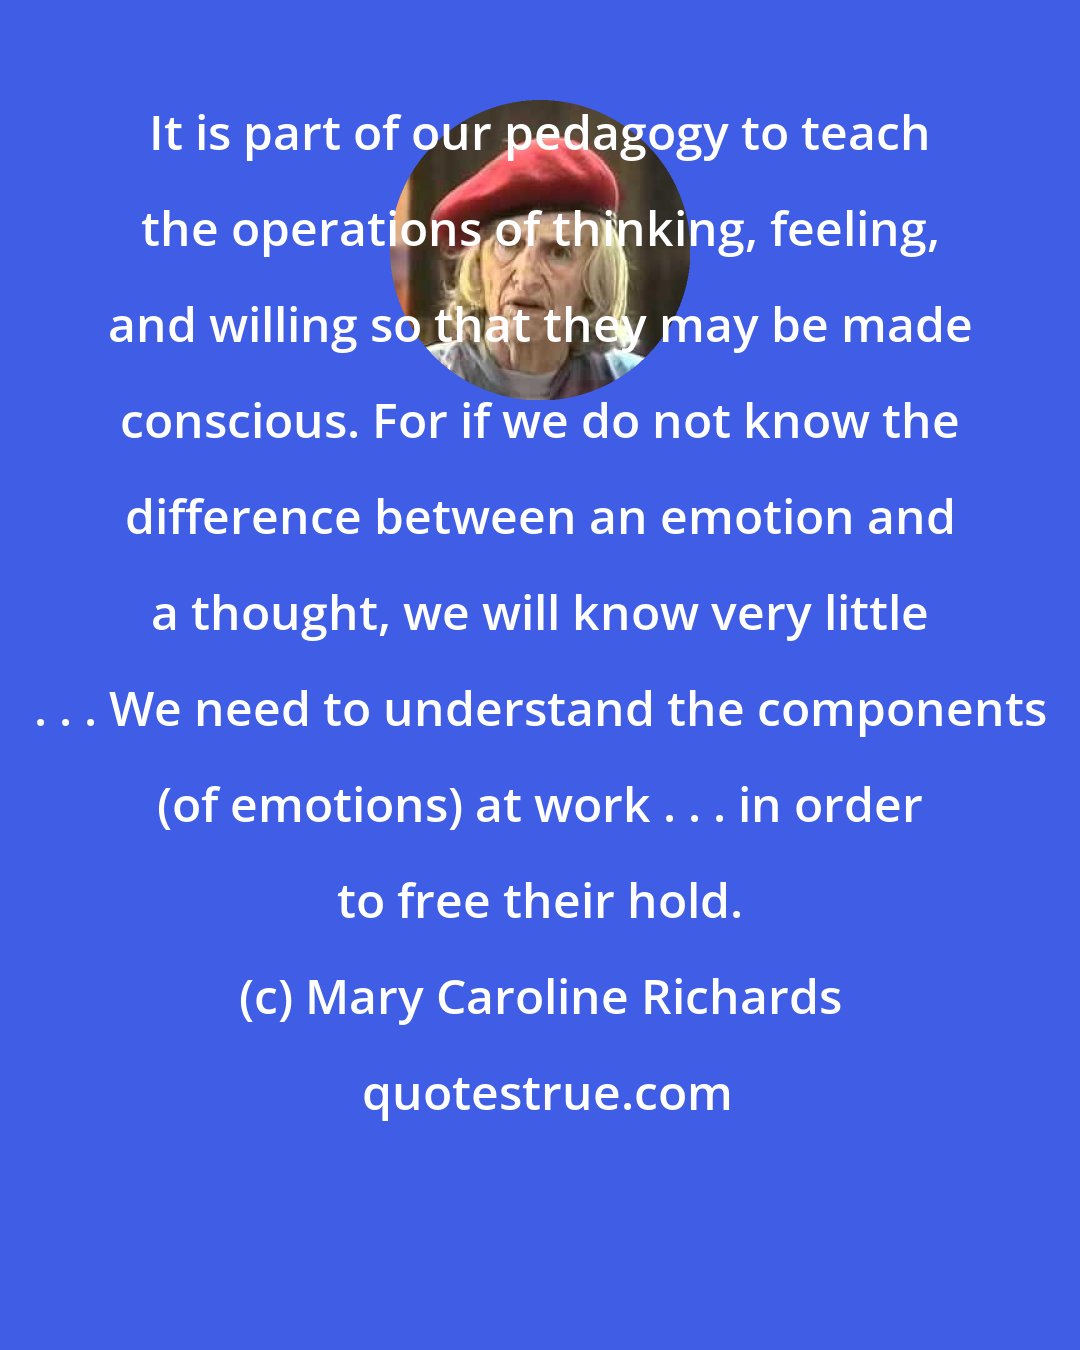 Mary Caroline Richards: It is part of our pedagogy to teach the operations of thinking, feeling, and willing so that they may be made conscious. For if we do not know the difference between an emotion and a thought, we will know very little . . . We need to understand the components (of emotions) at work . . . in order to free their hold.